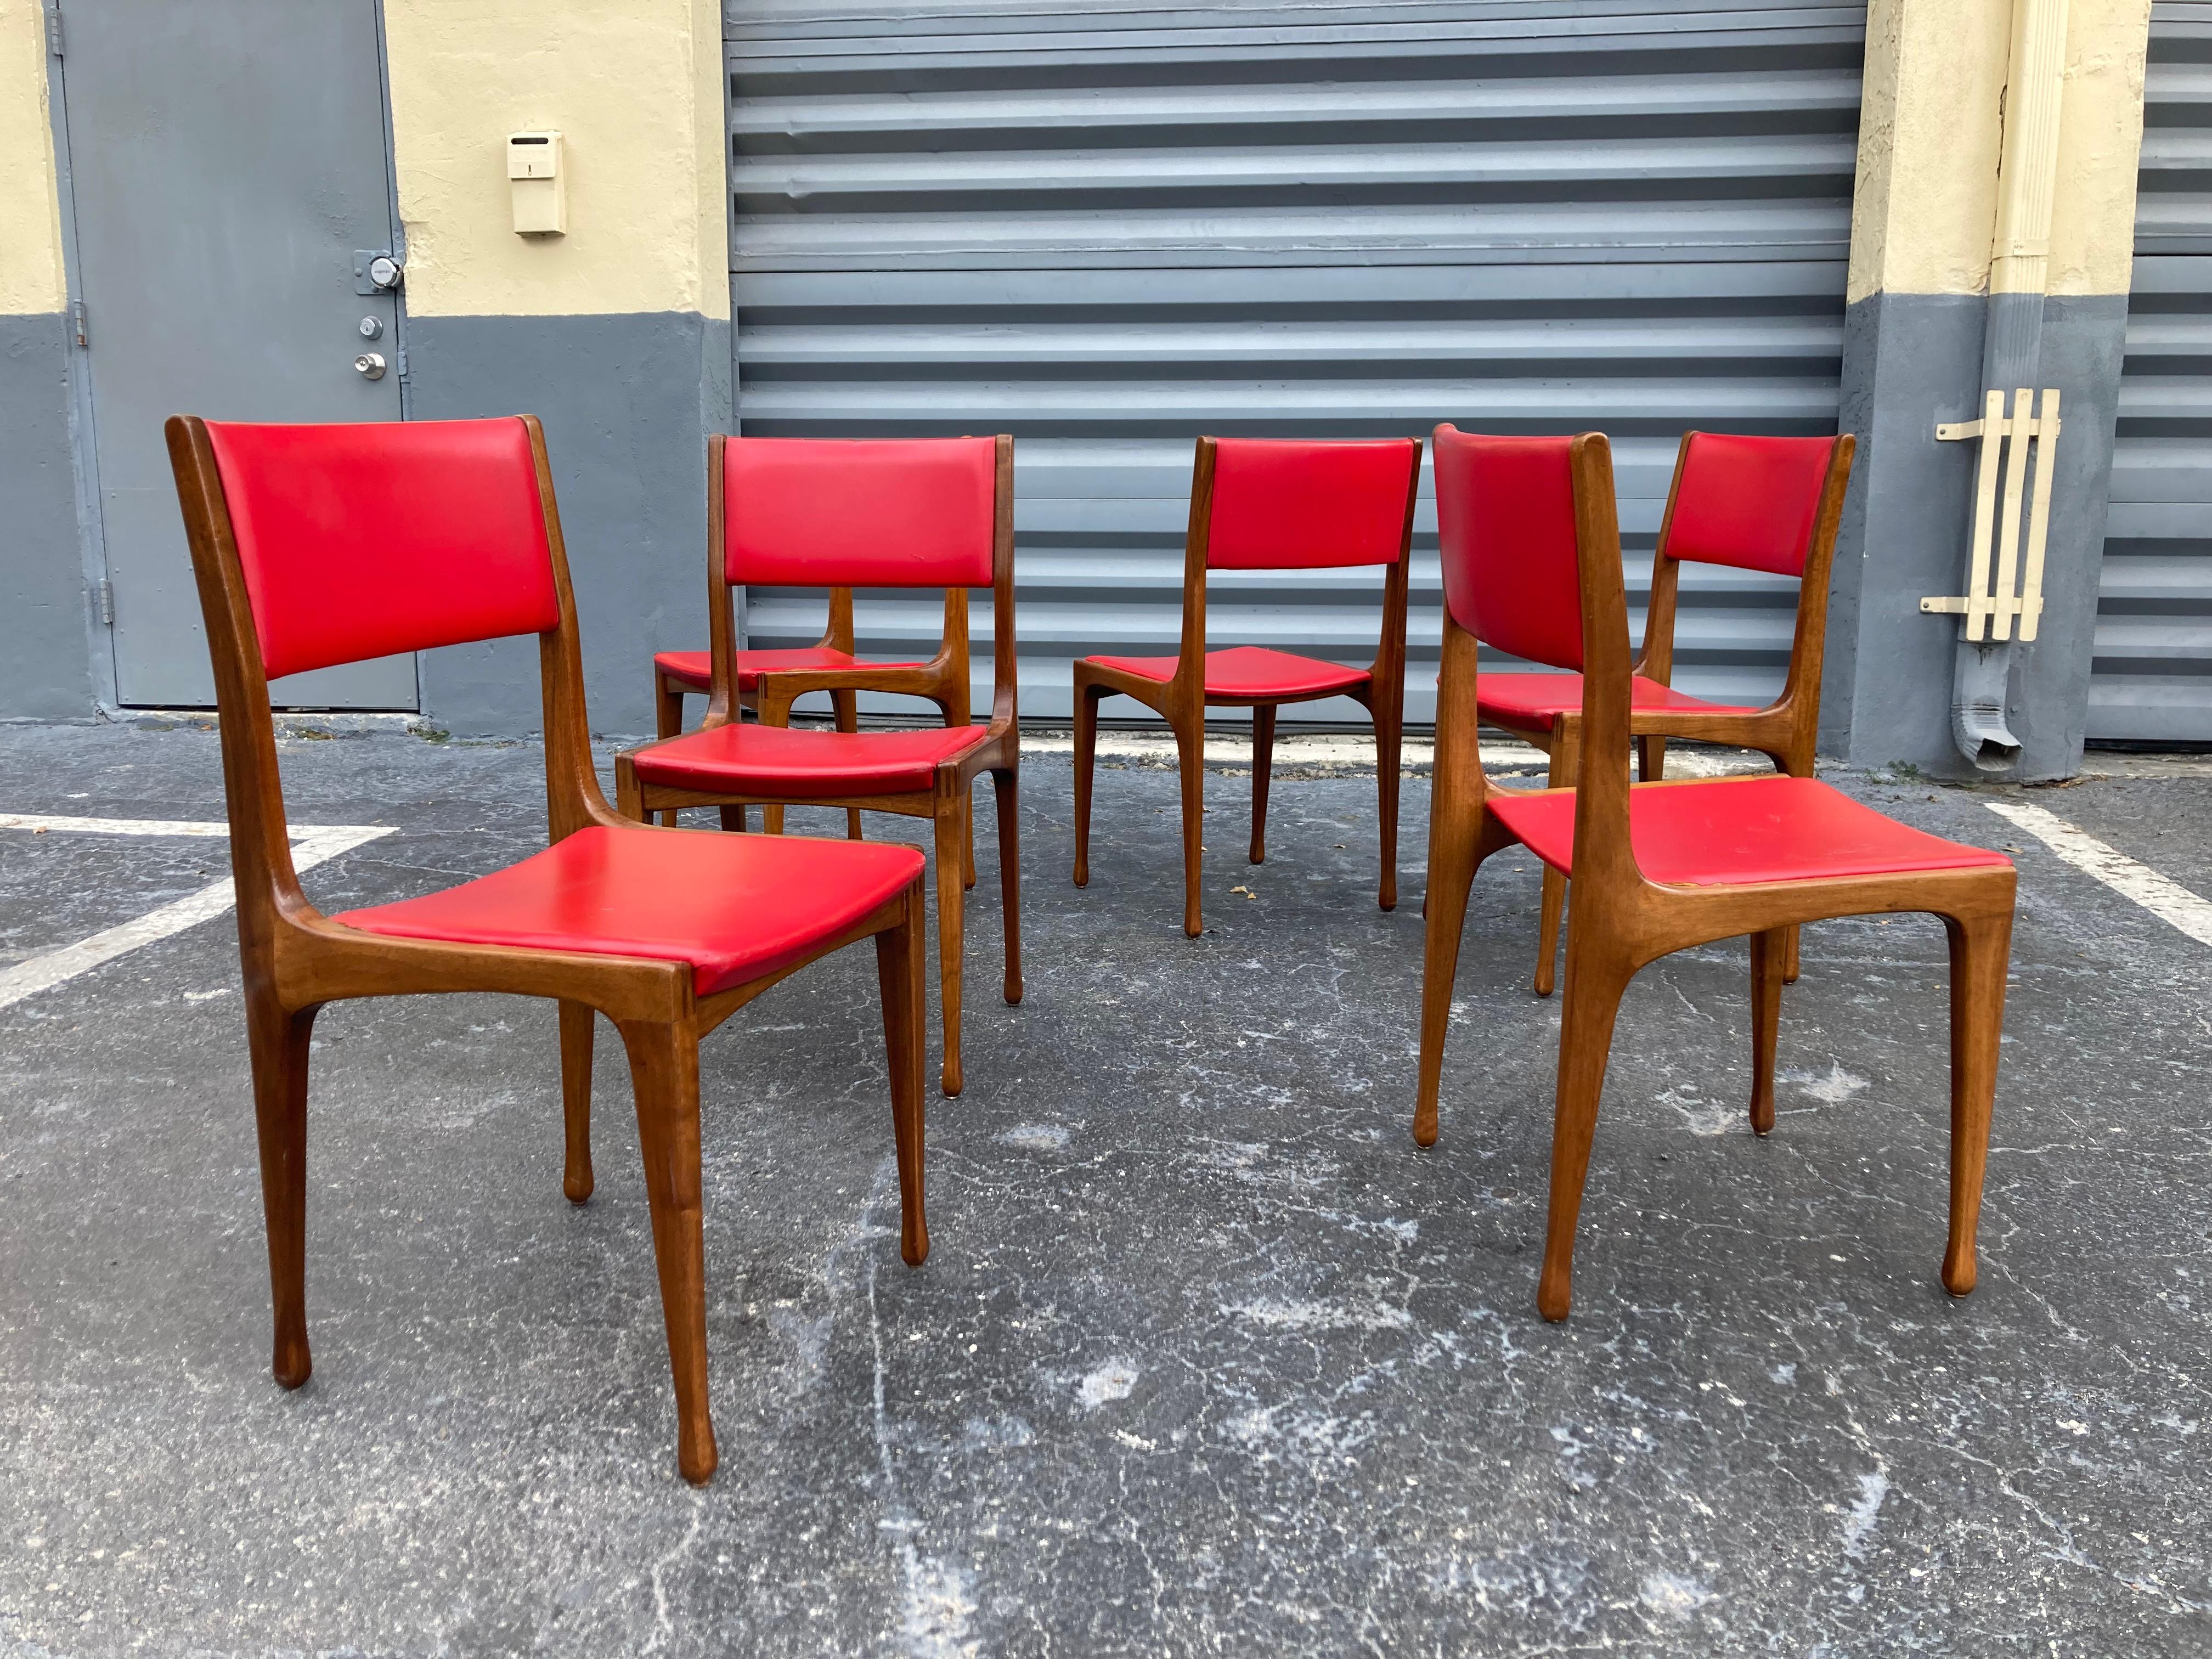 Set of 6 chairs Mod. 693, Designed by Carlo de Carli for Cassina.
All original condition. Solid walnut and red vinyl. 
 We can help if buyer wants seats and backs recovered.